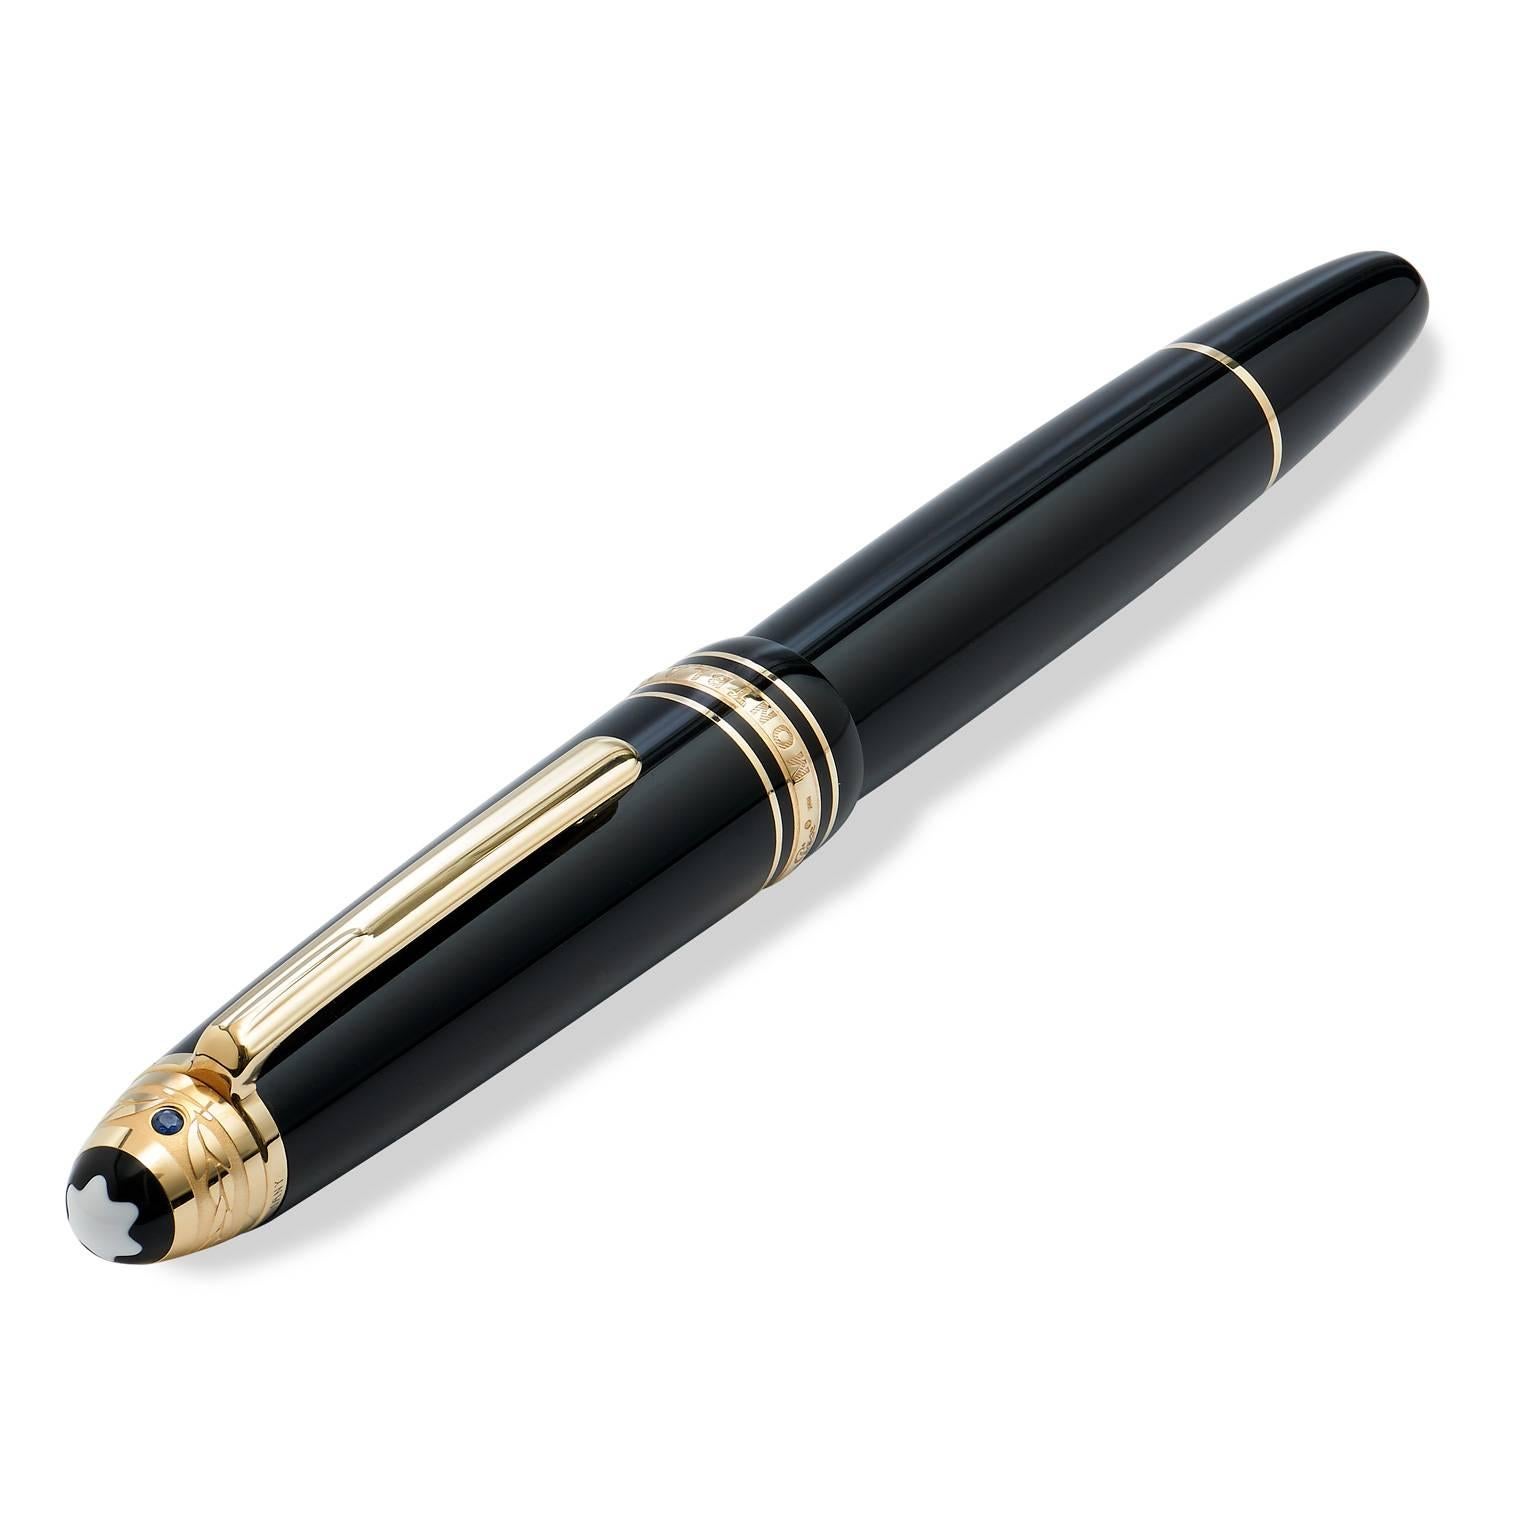 This Mont Blanc Meinsterstuck Legrand rollerball pen is signature good and is crafted in a beautiful blue hue. New Retail Price: $445. Our Price: $356.